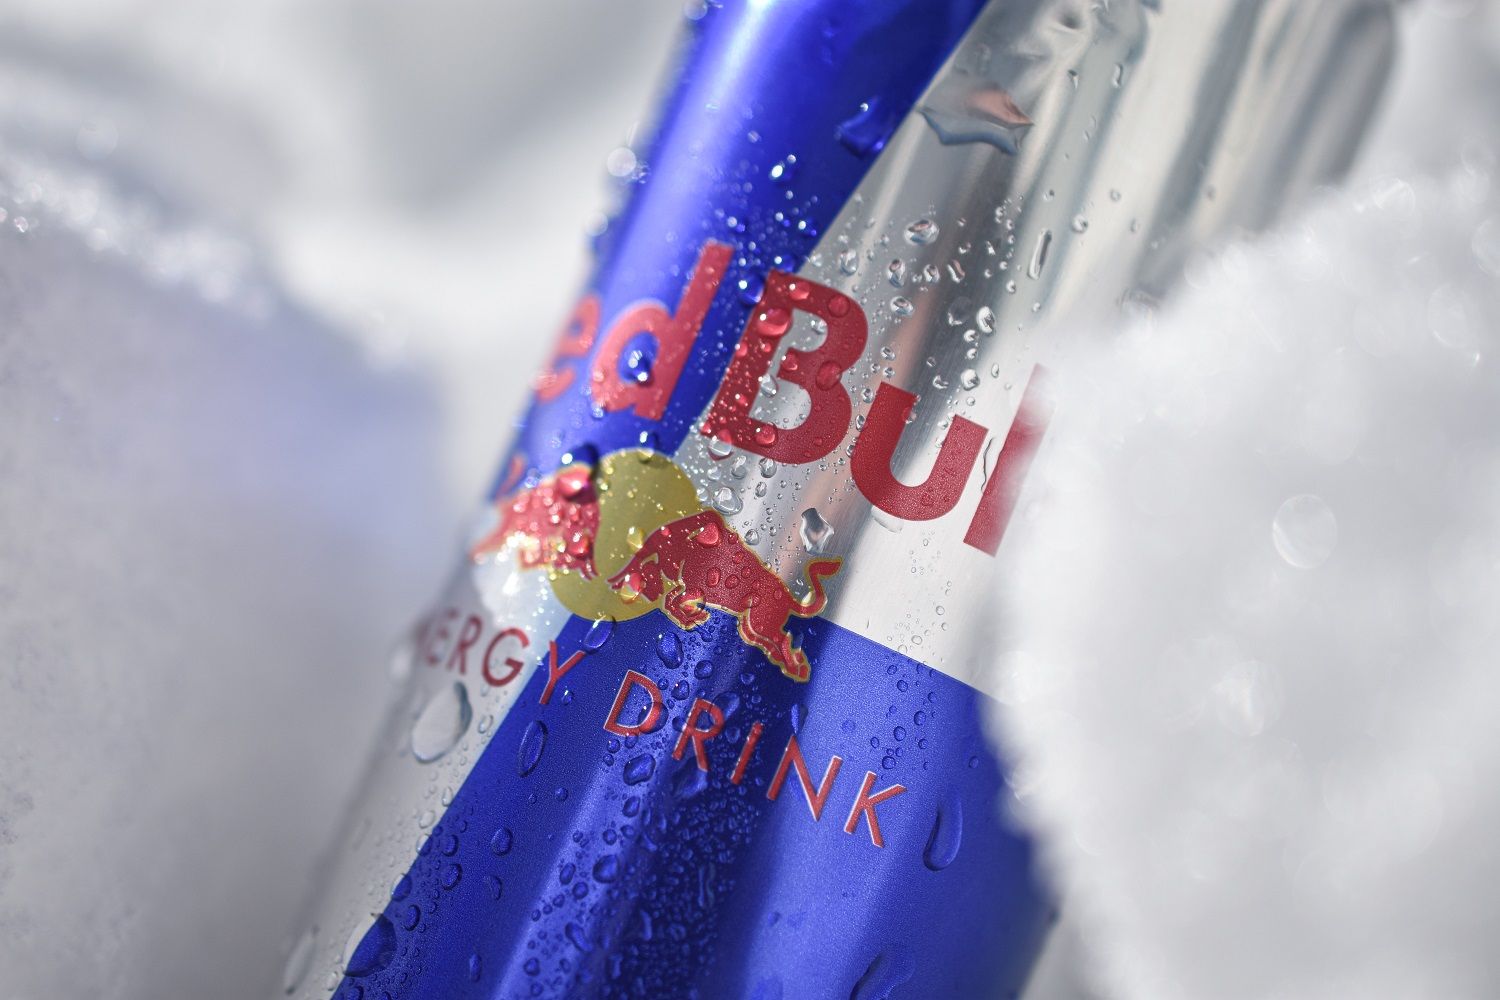 Red Bull pays out €550m to founders, including family of drink's inventor, Business